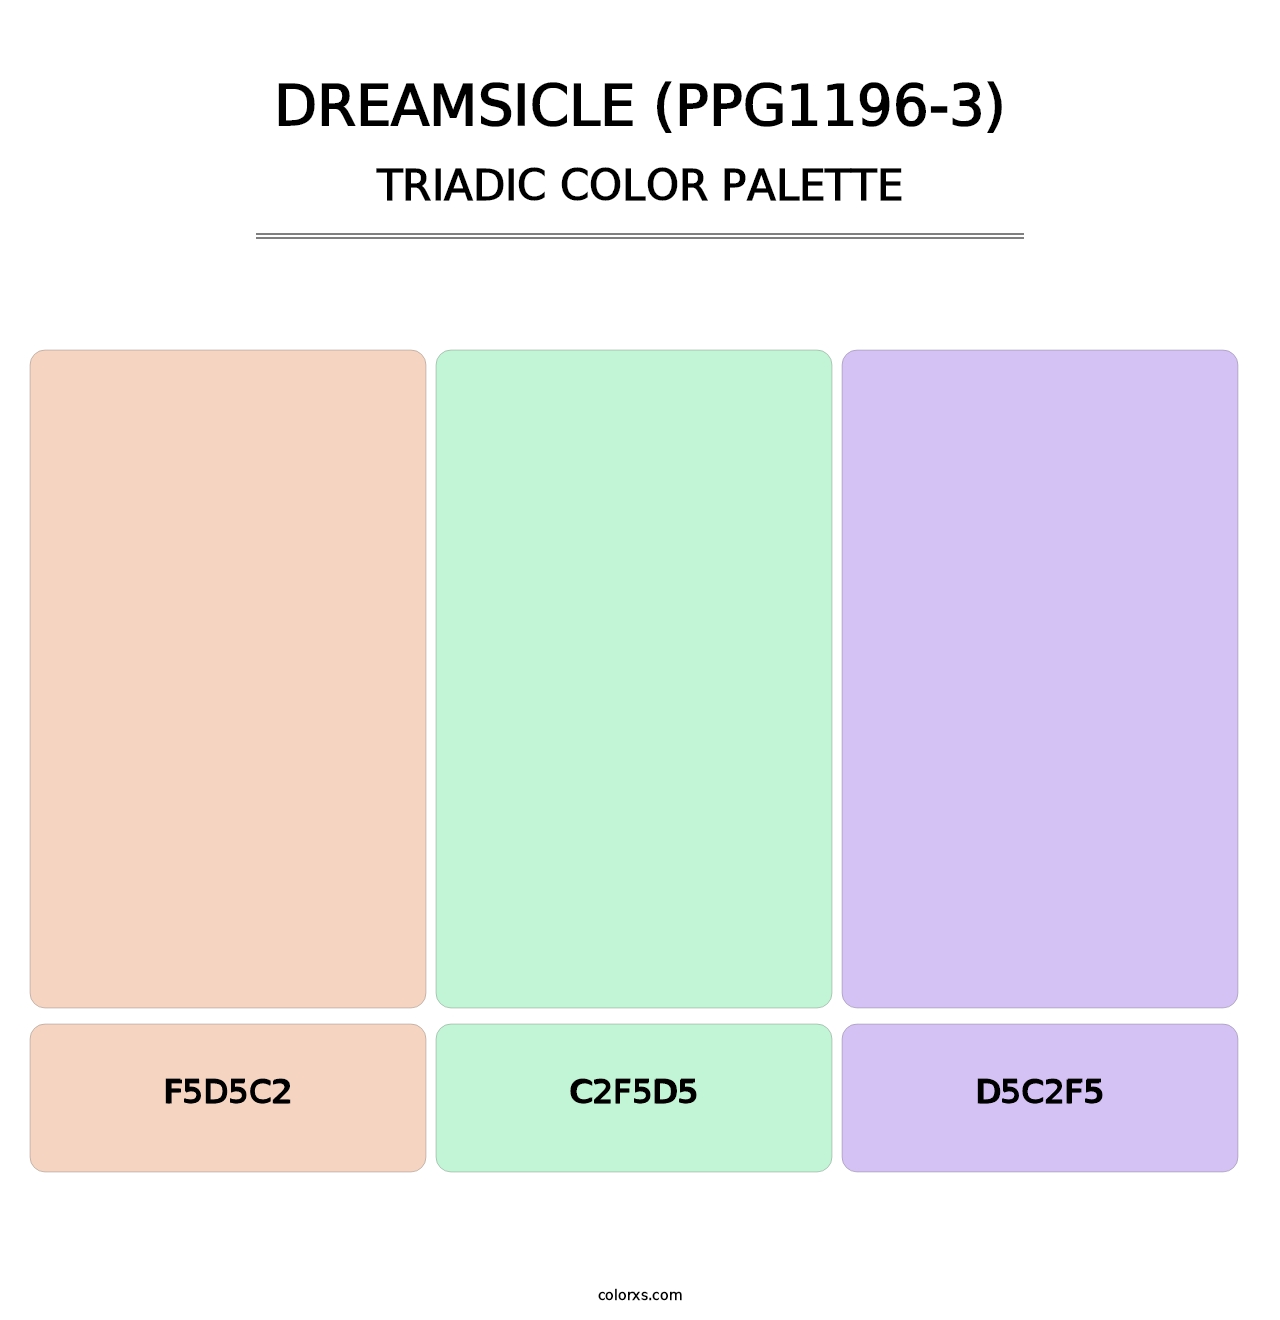 Dreamsicle (PPG1196-3) - Triadic Color Palette